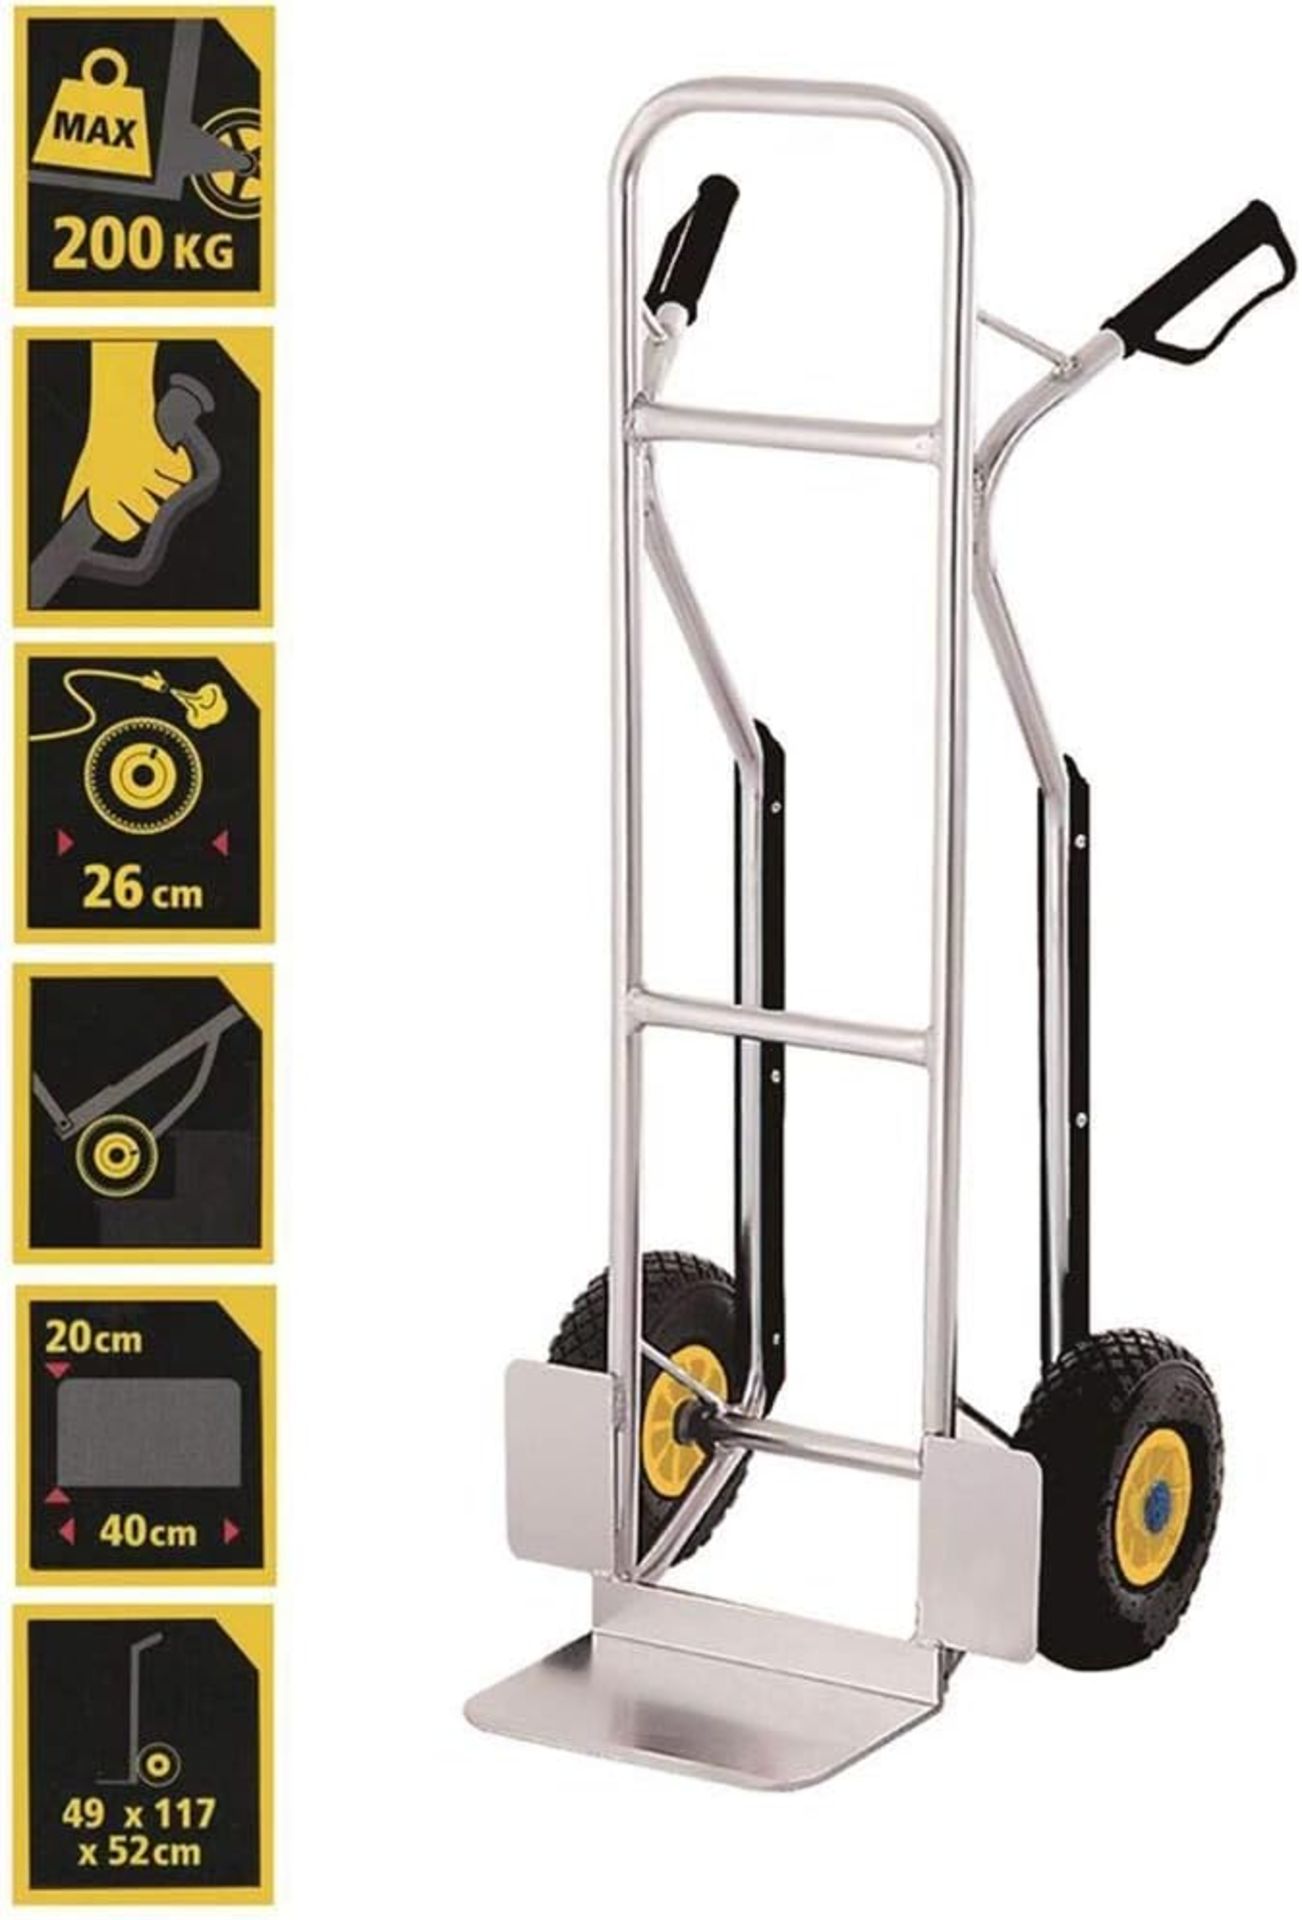 Stanley Aluminium Hand Truck-200KG, Silver, SXWTC-HT525, Large pneumatic wheels allow for easy - Image 2 of 5